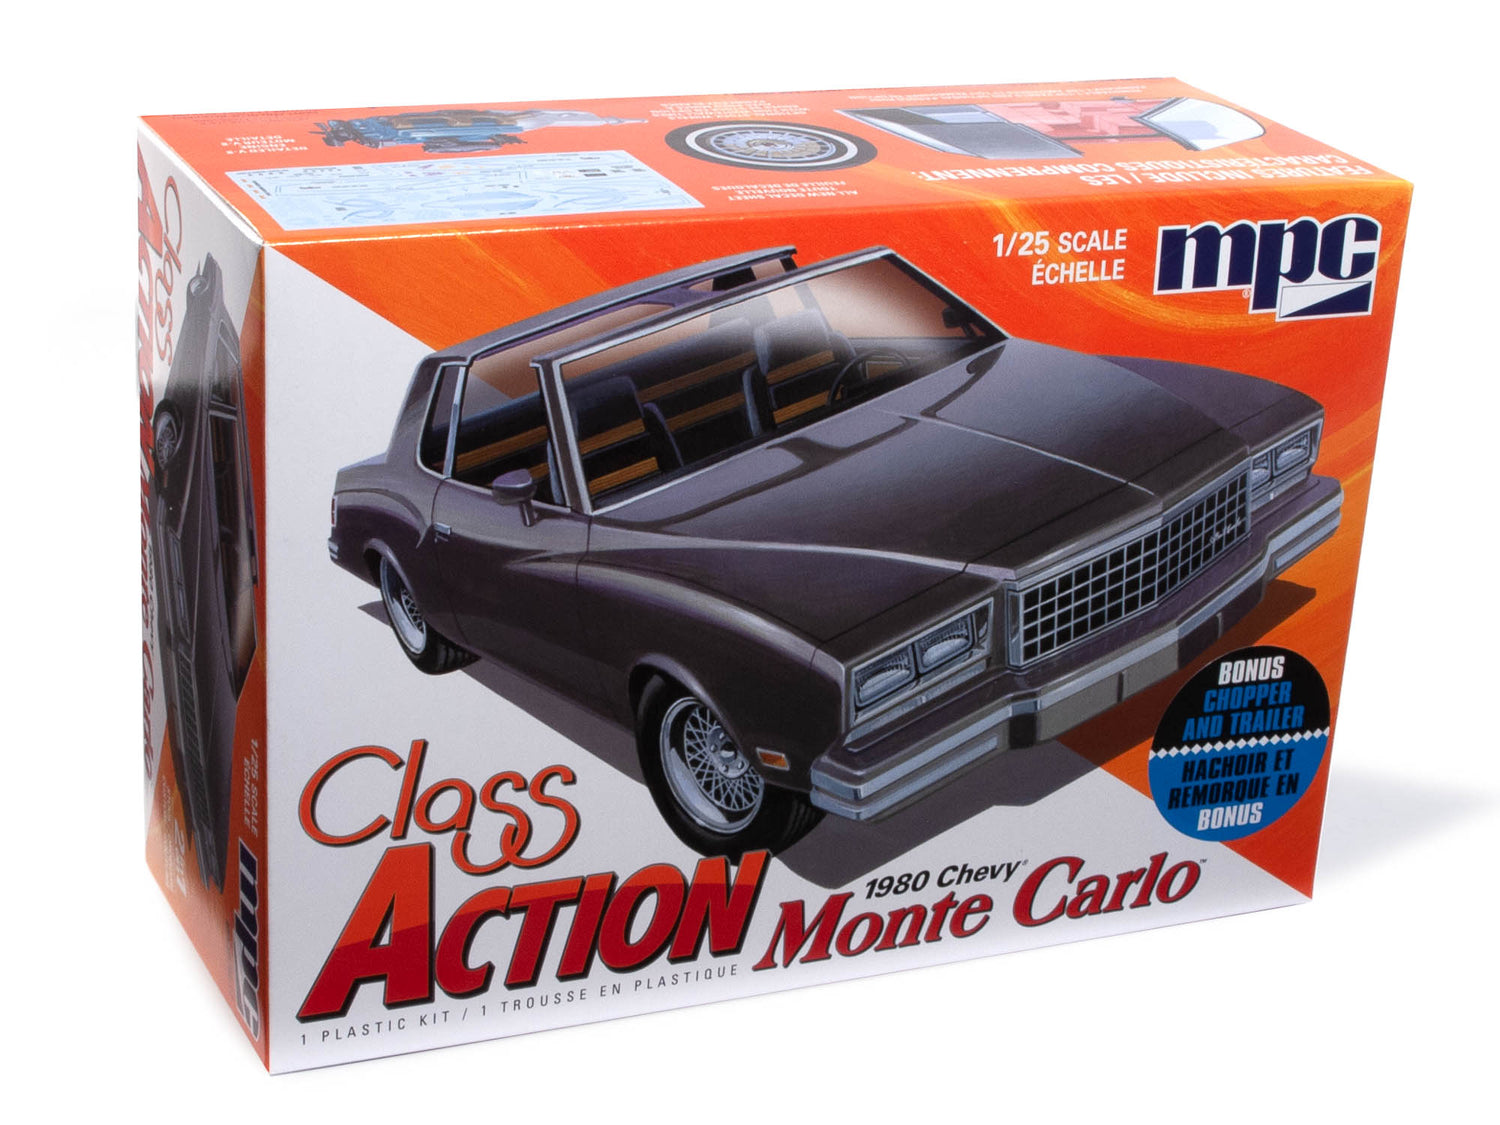 MPC 1980 Chevy Monte Carlo "Class Action" 1:25 Scale Model Kit